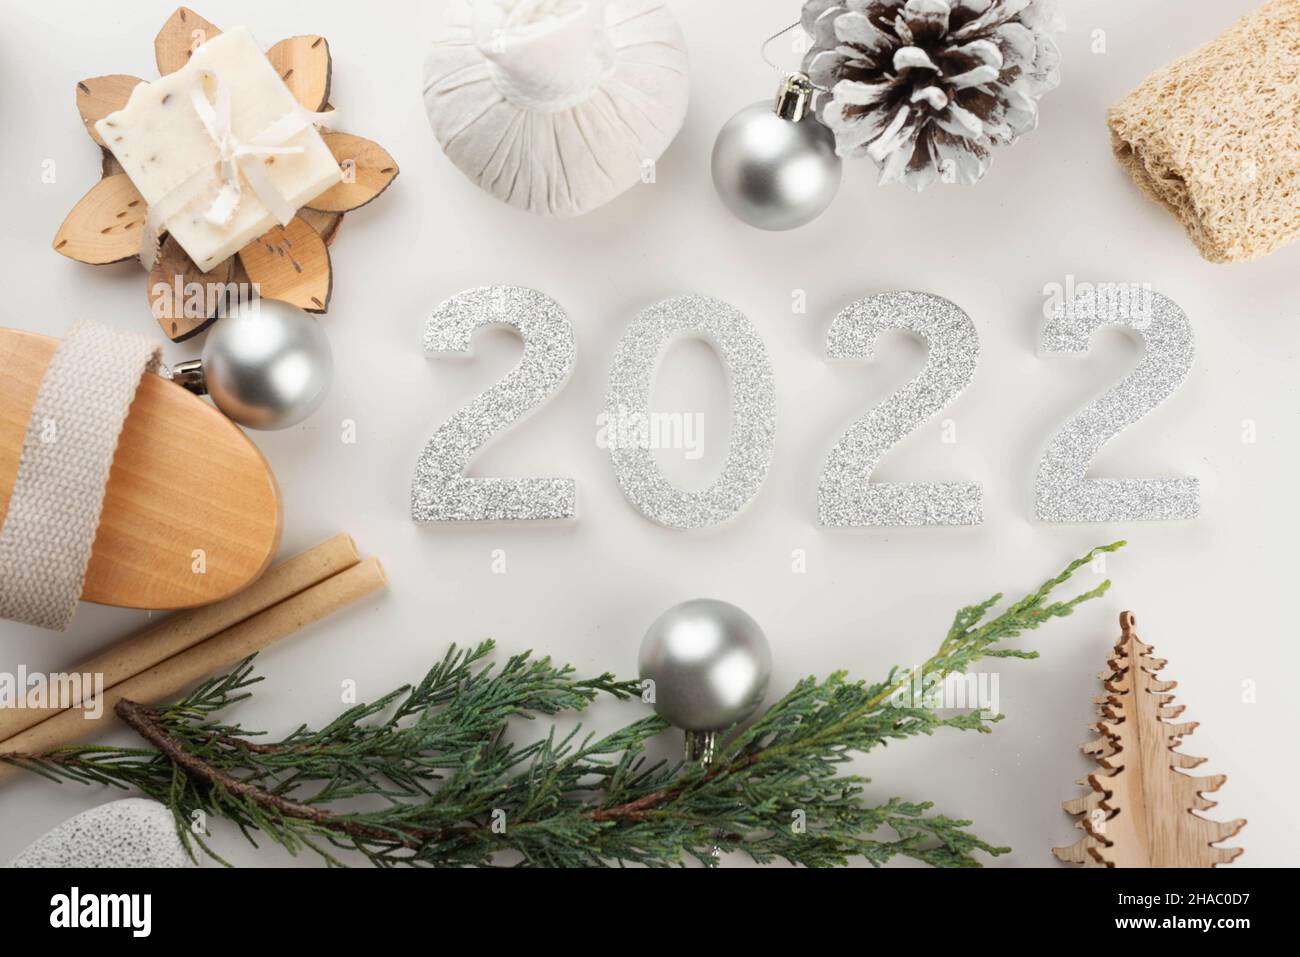 New Year festive trendy minimalistic background for spa and beauty industry. Stock Photo